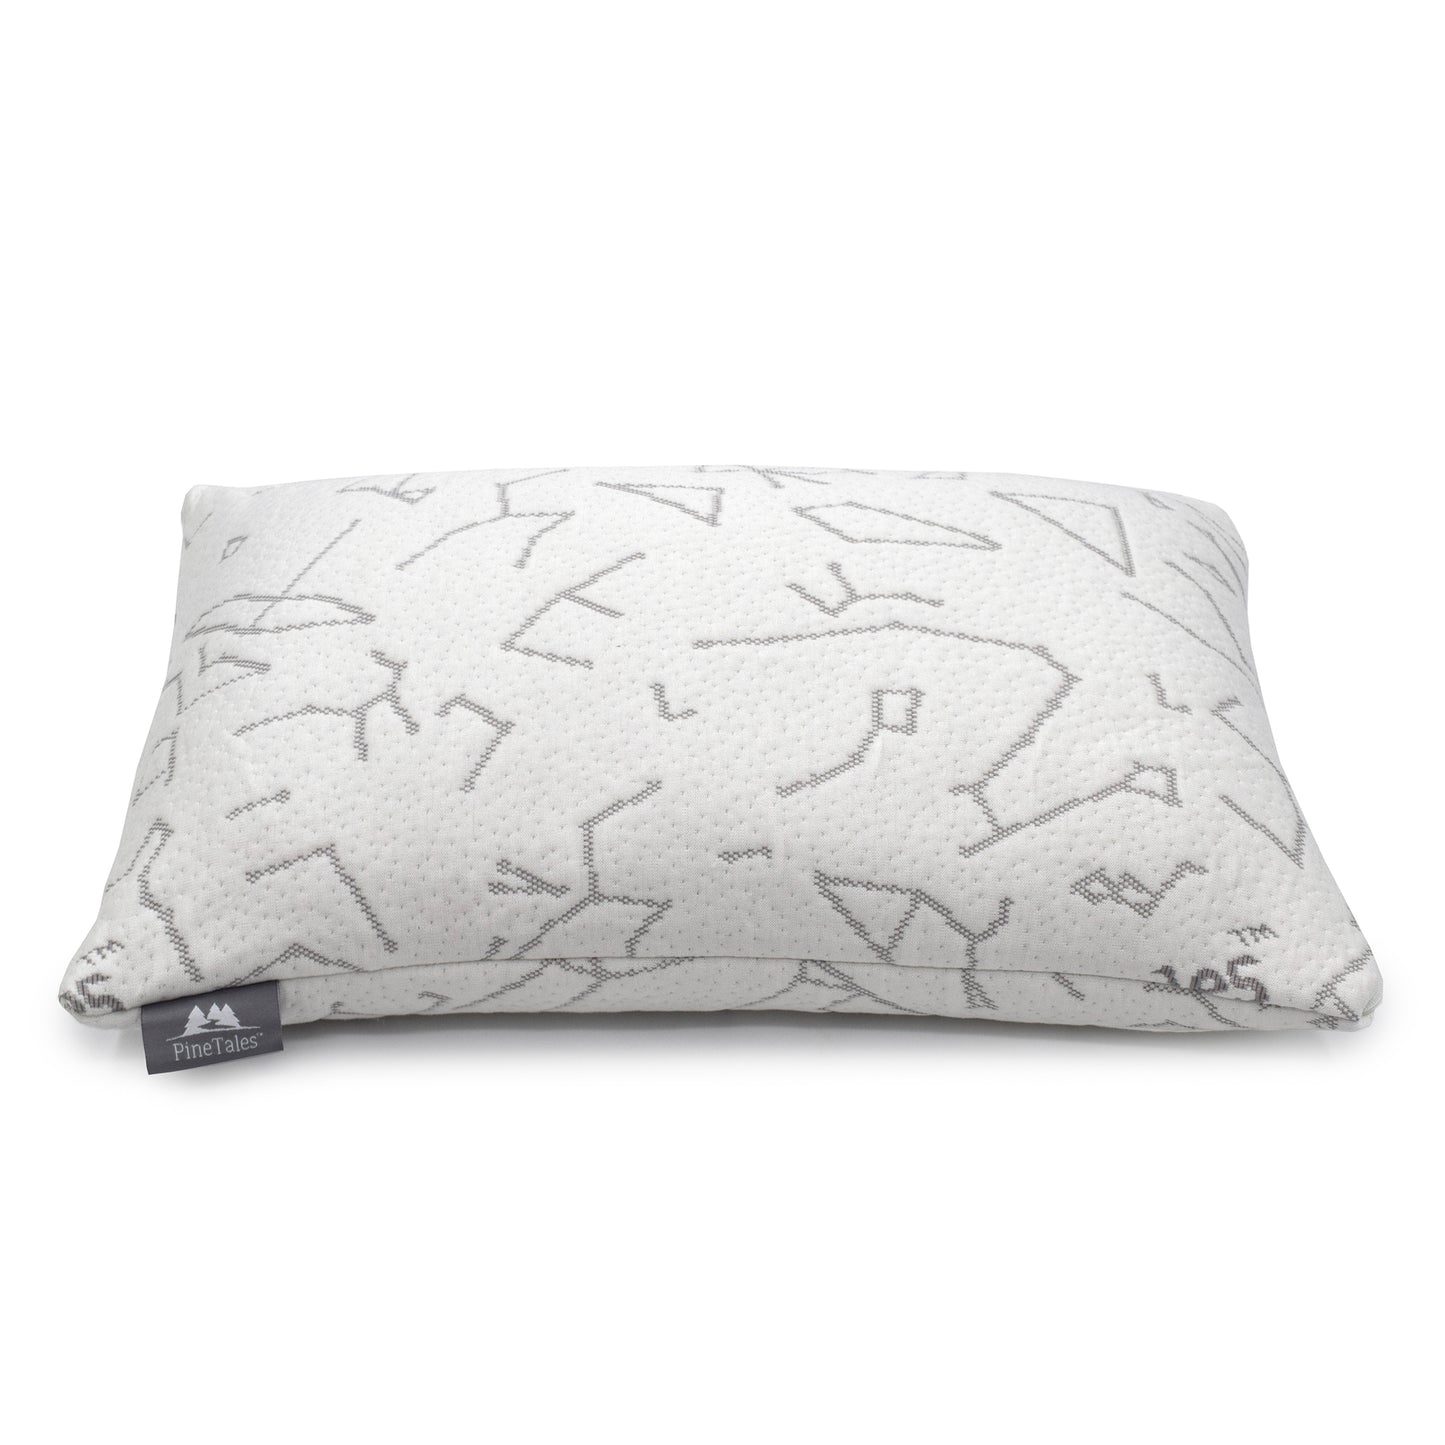 Buckwheat Pillow Model with Designer Bamboo Pillowcase by PineTales - STAR